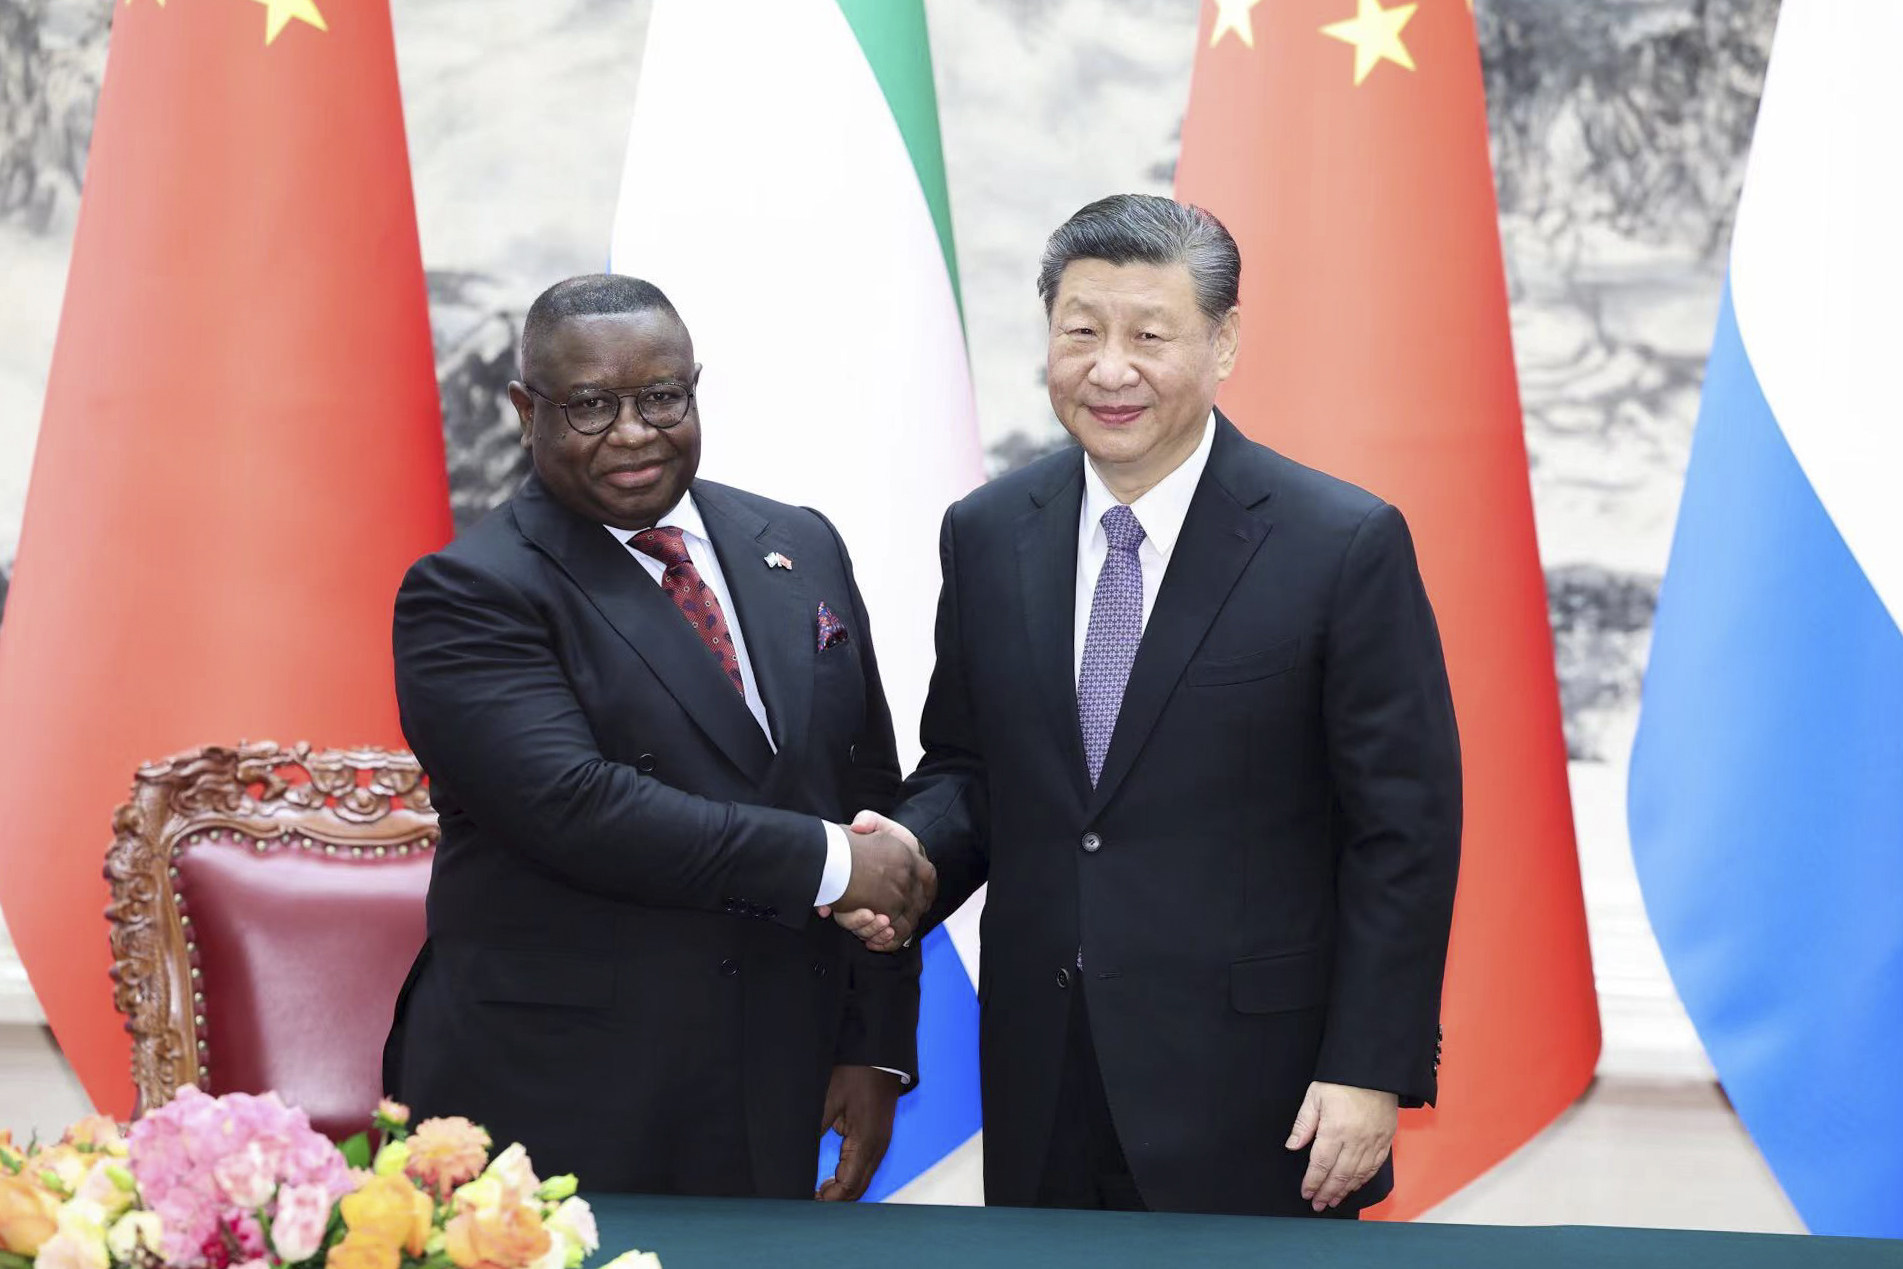 Sierra Leone President Julius Maada Bio and Chinese President Xi Jinping during the West African leader’s state visit to China this week. Photo: Xinhua